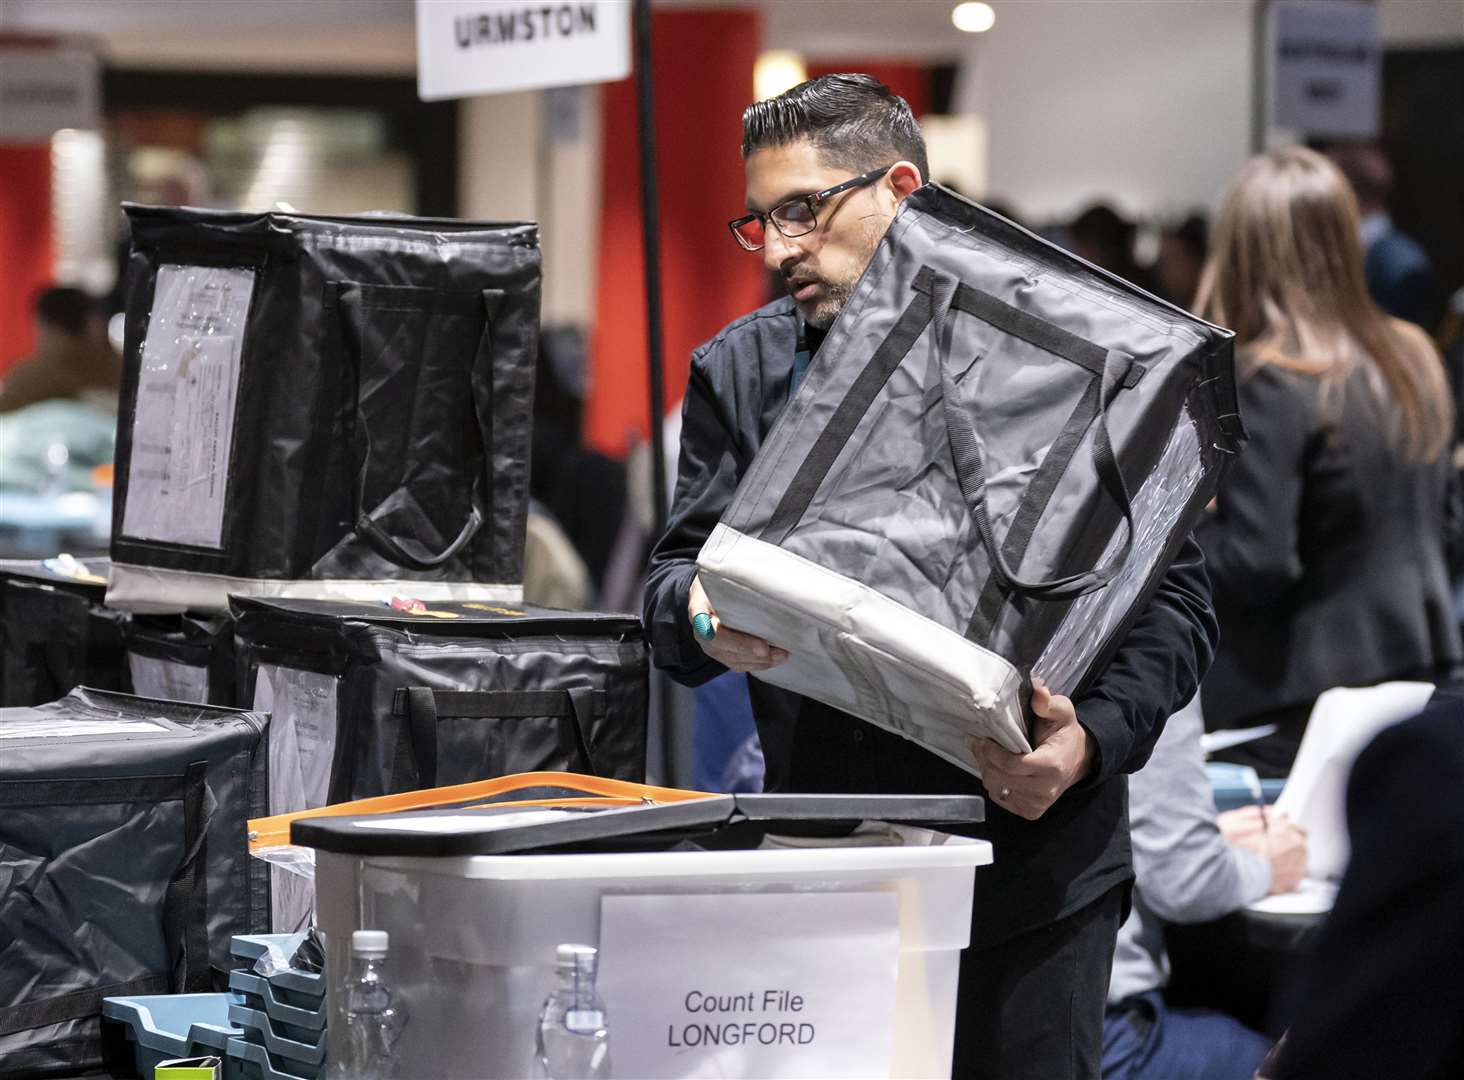 Ballot boxes arrive to be counted at Old Trafford for the Stretford and Urmston by-election (Danny Lawson/PA Wire)